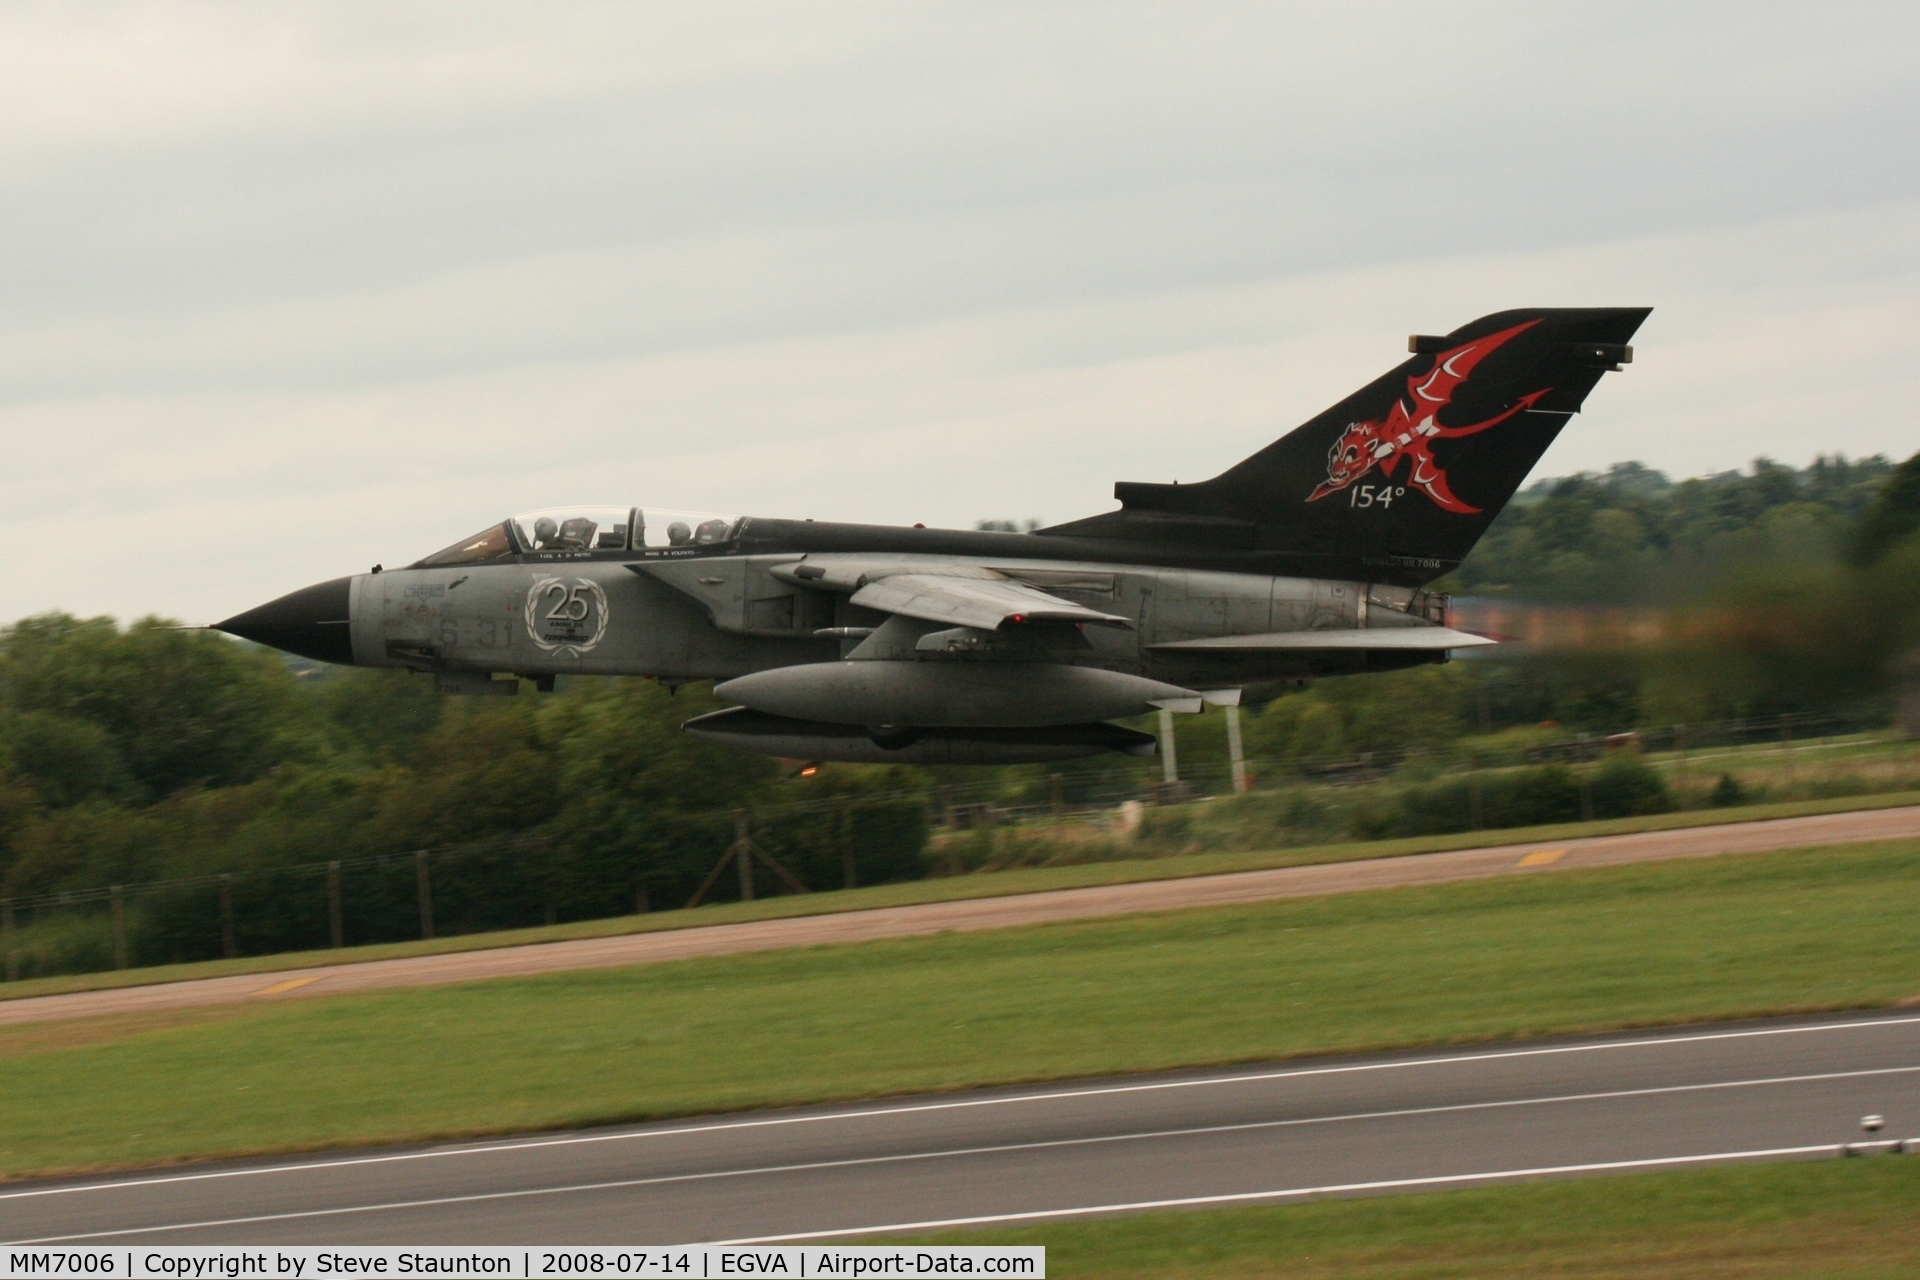 MM7006, 1982 Panavia Tornado IDS C/N 102/IS005/5008, Taken at the Royal International Air Tattoo 2008 during arrivals and departures (show days cancelled due to bad weather)